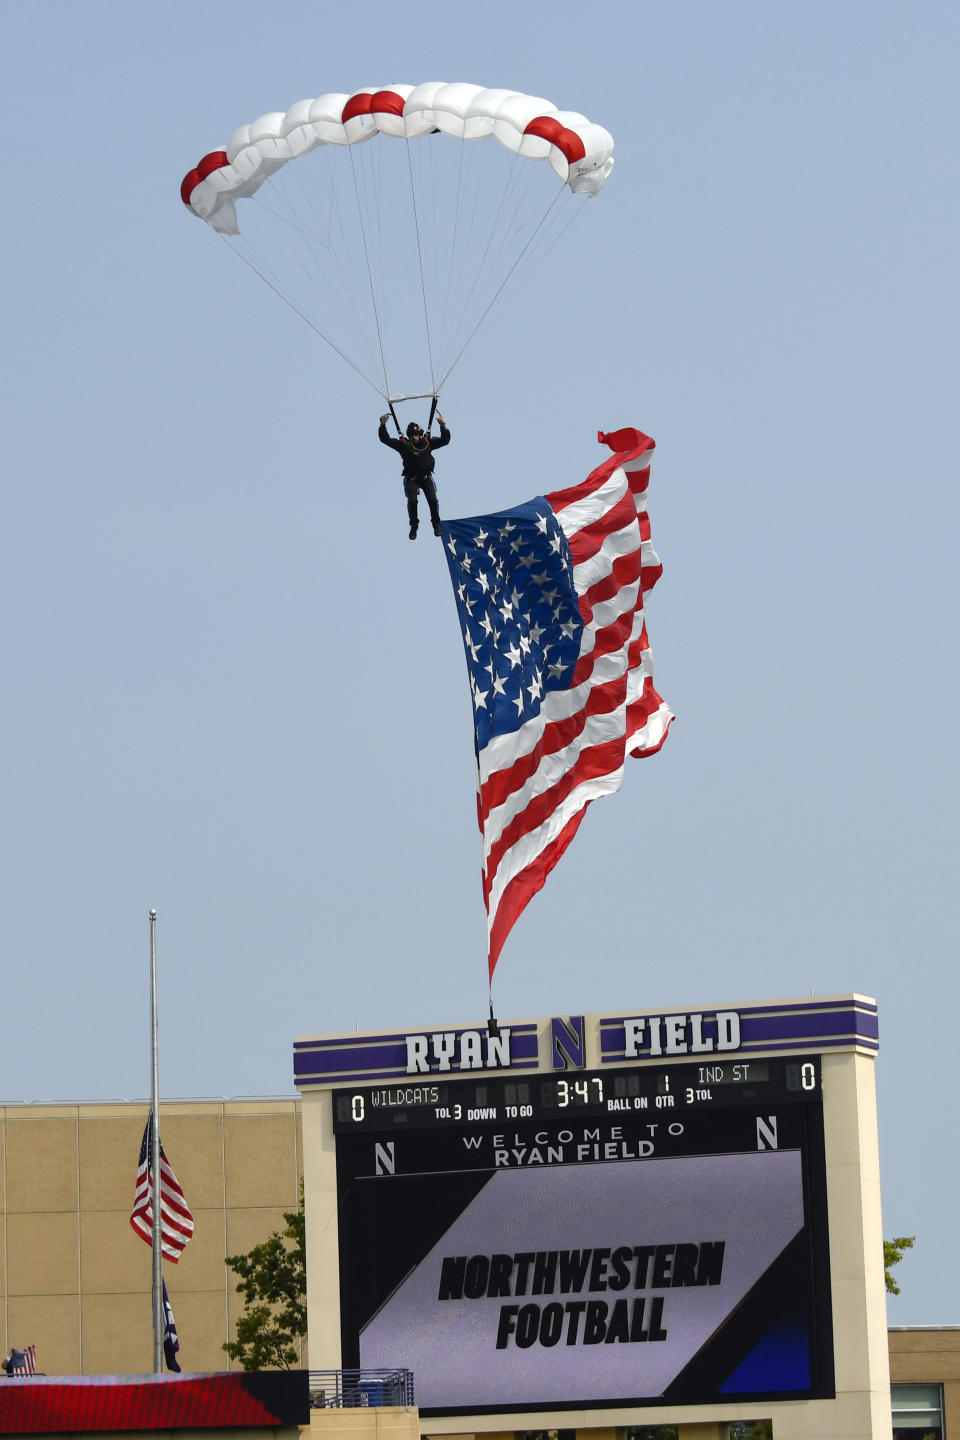 A sky diver lands on the field with an oversized United States flag prior to the start of an NCAA college football game between Northwestern and Indiana State in Evanston, Ill, Saturday, Sept. 11, 2021. (AP Photo/Matt Marton)